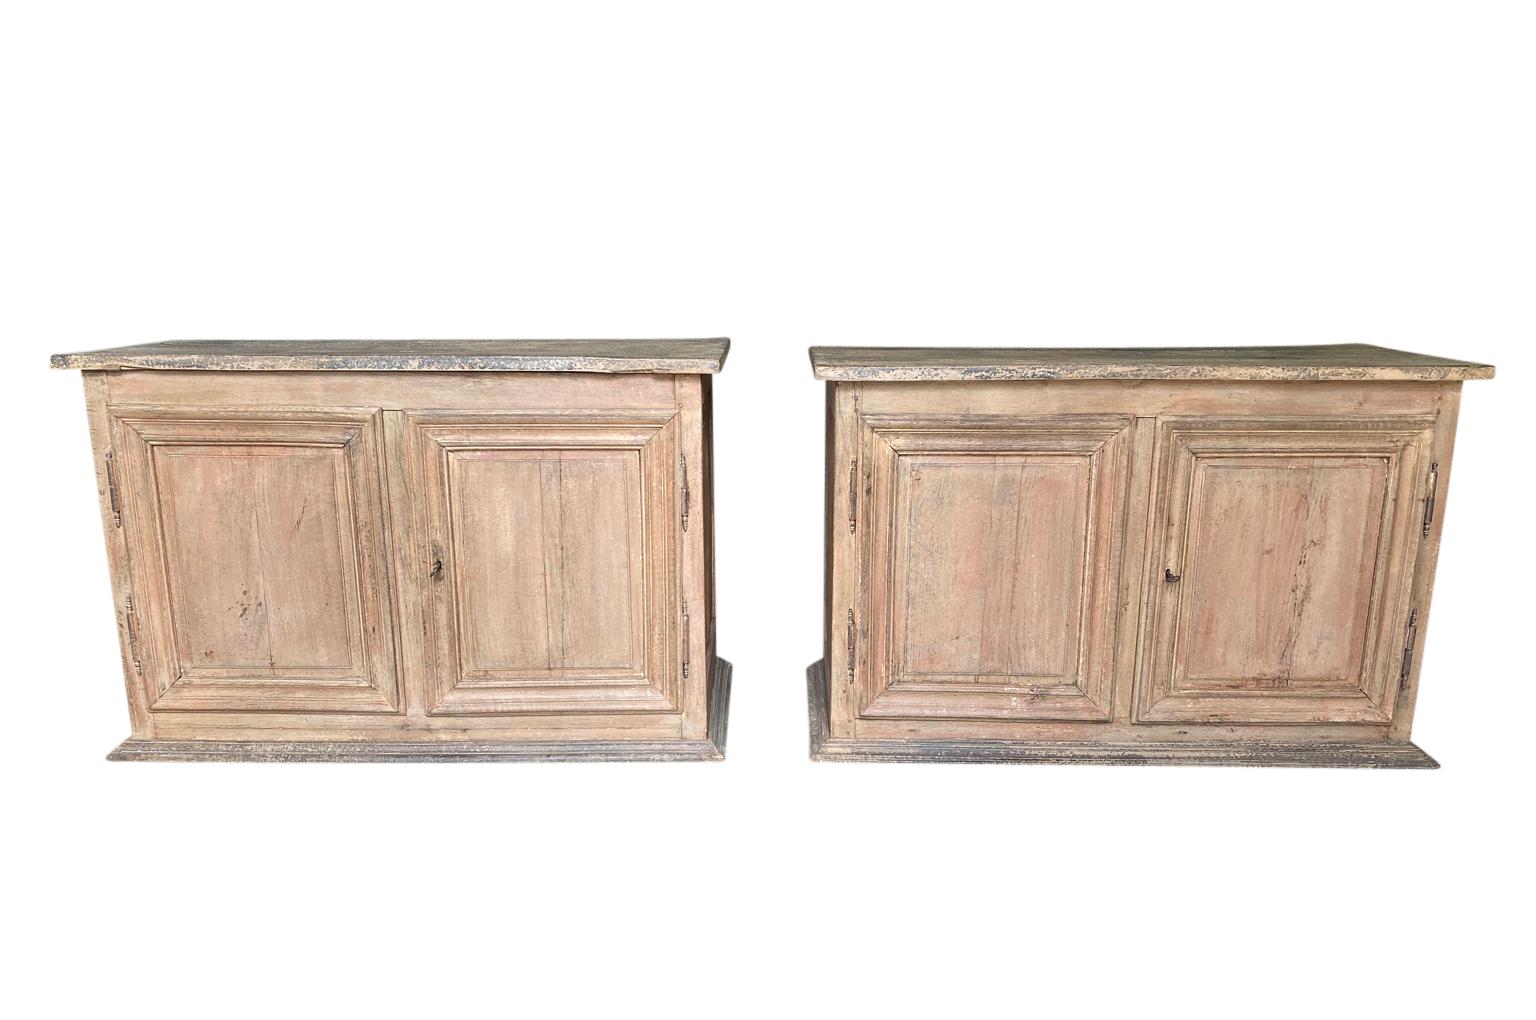 A very lovely pair of 18th century buffets from the Provence region of France. Handsomely constructed from painted oak with molded door panels resting on plinth bases. Wonderful finish and patina.